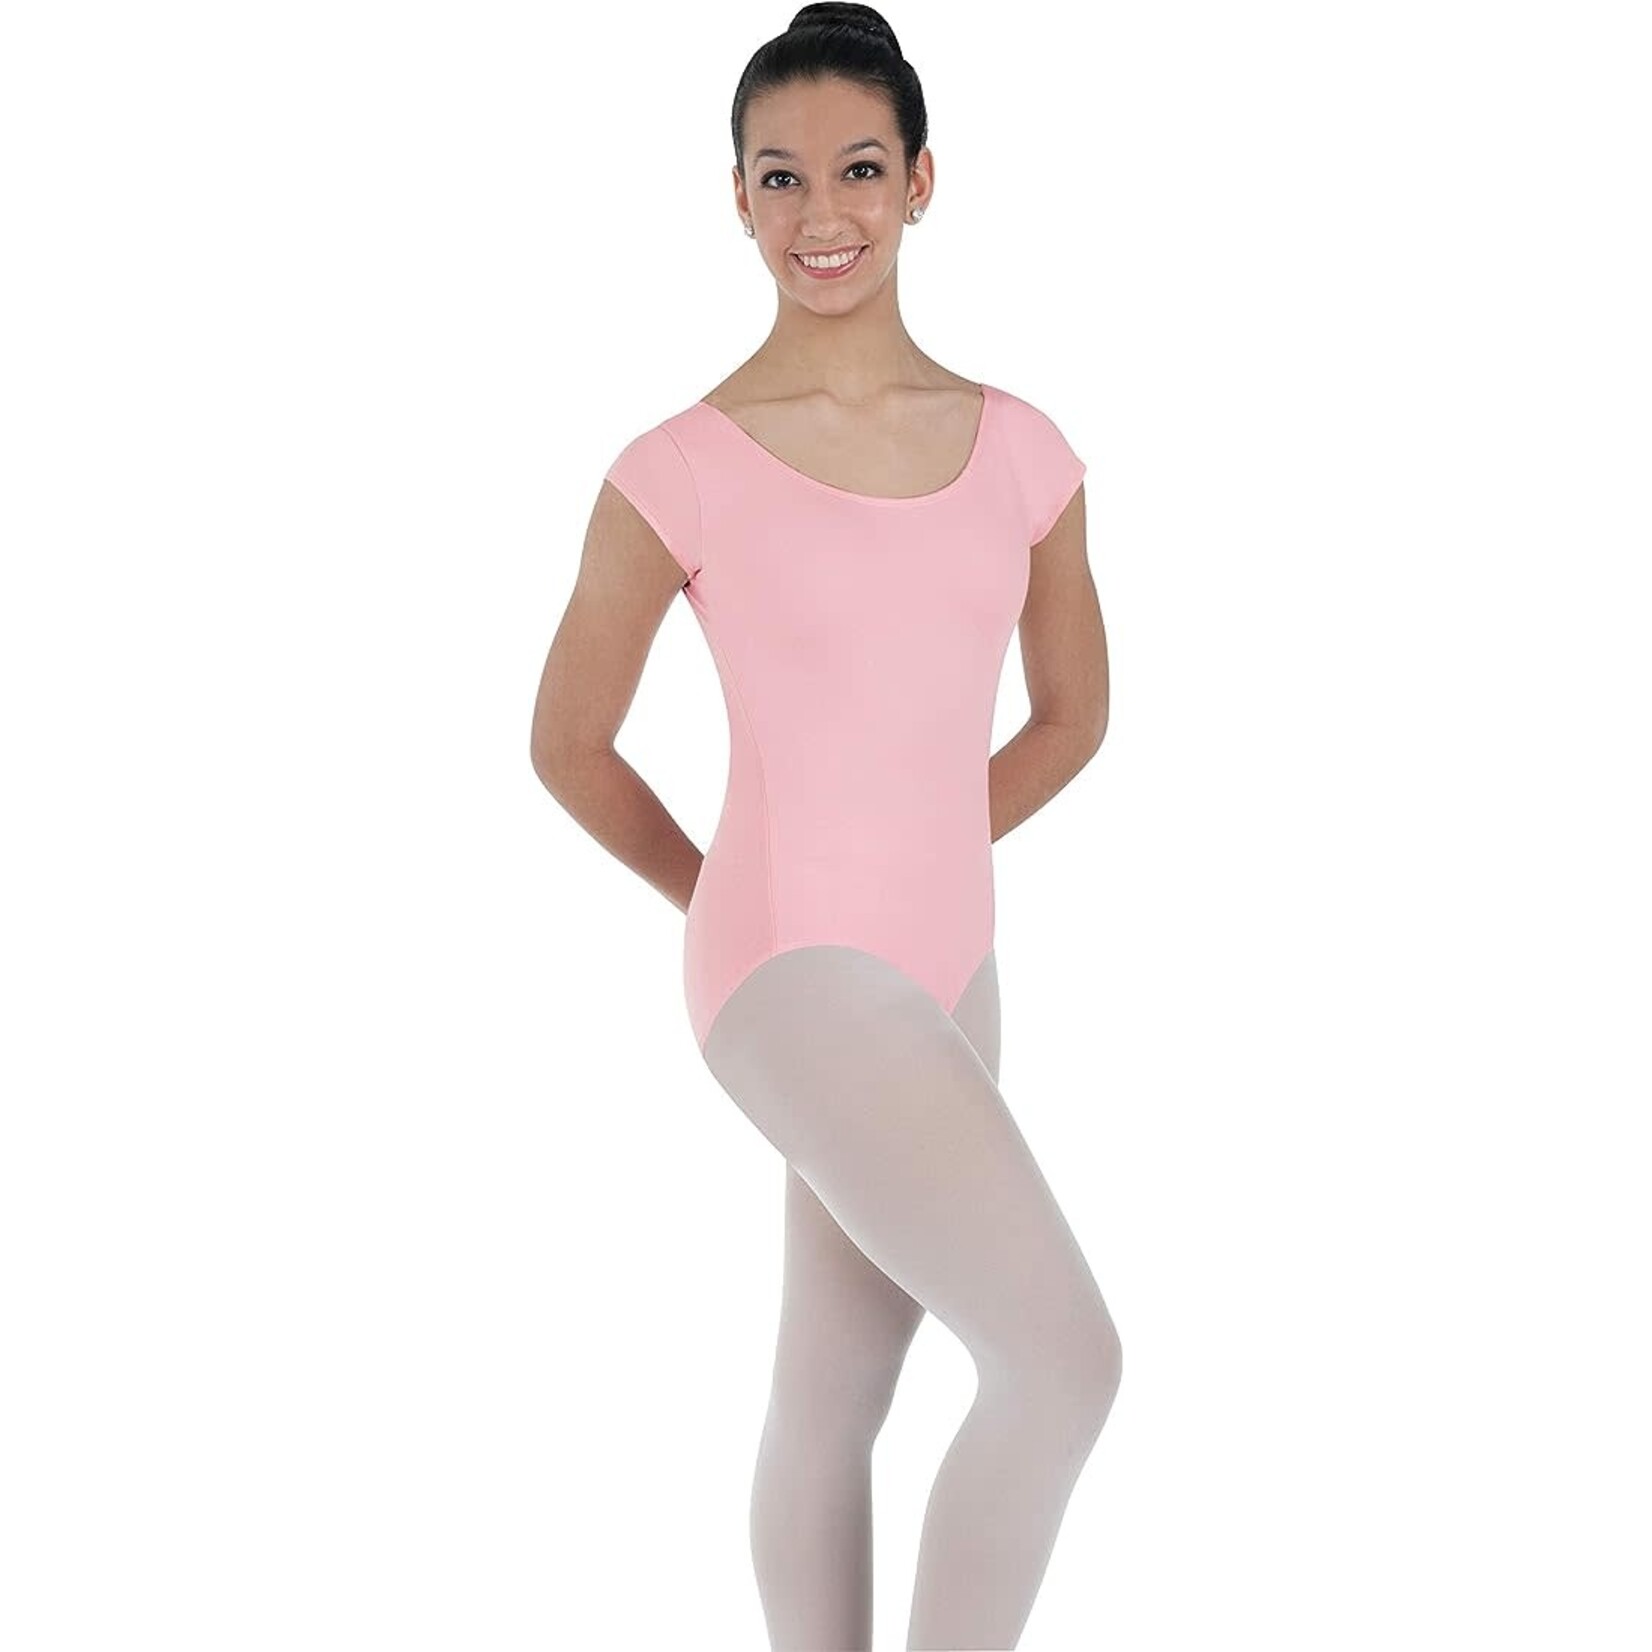 Body Wrappers Body Wrappers BWP020 Girls Capsleeve Leotard